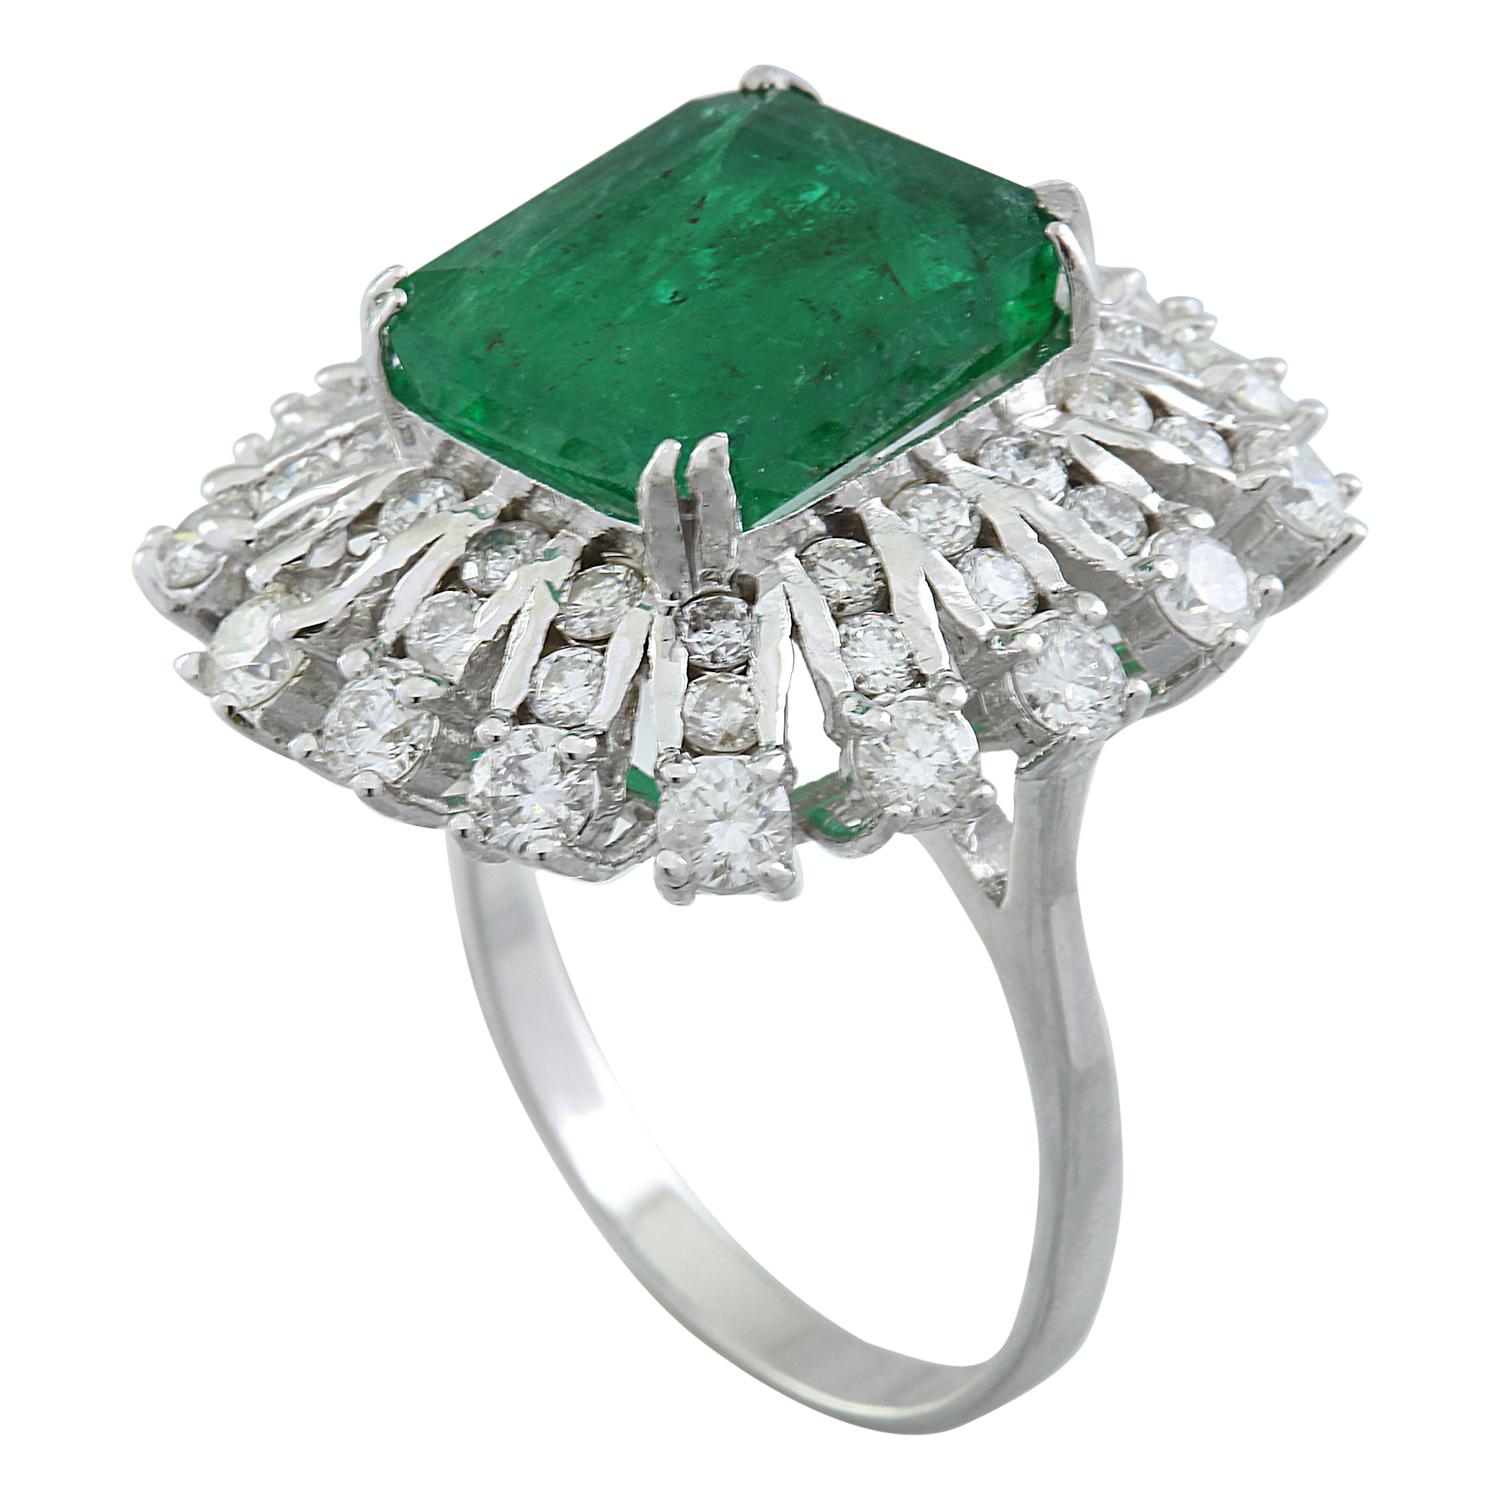 7.60 Carat Natural Emerald 14 Karat Solid White Gold Diamond Ring
Stamped: 14K 
Ring Size: 7
Total Ring Weight: 8.5 Grams
Emerald Weight: 5.60 Carat (12.00x10.00 Millimeter) 
Diamond Weight: 2.00 Carat (F-G Color, VS2-SI1 Clarity)
Quantity: 48
Face